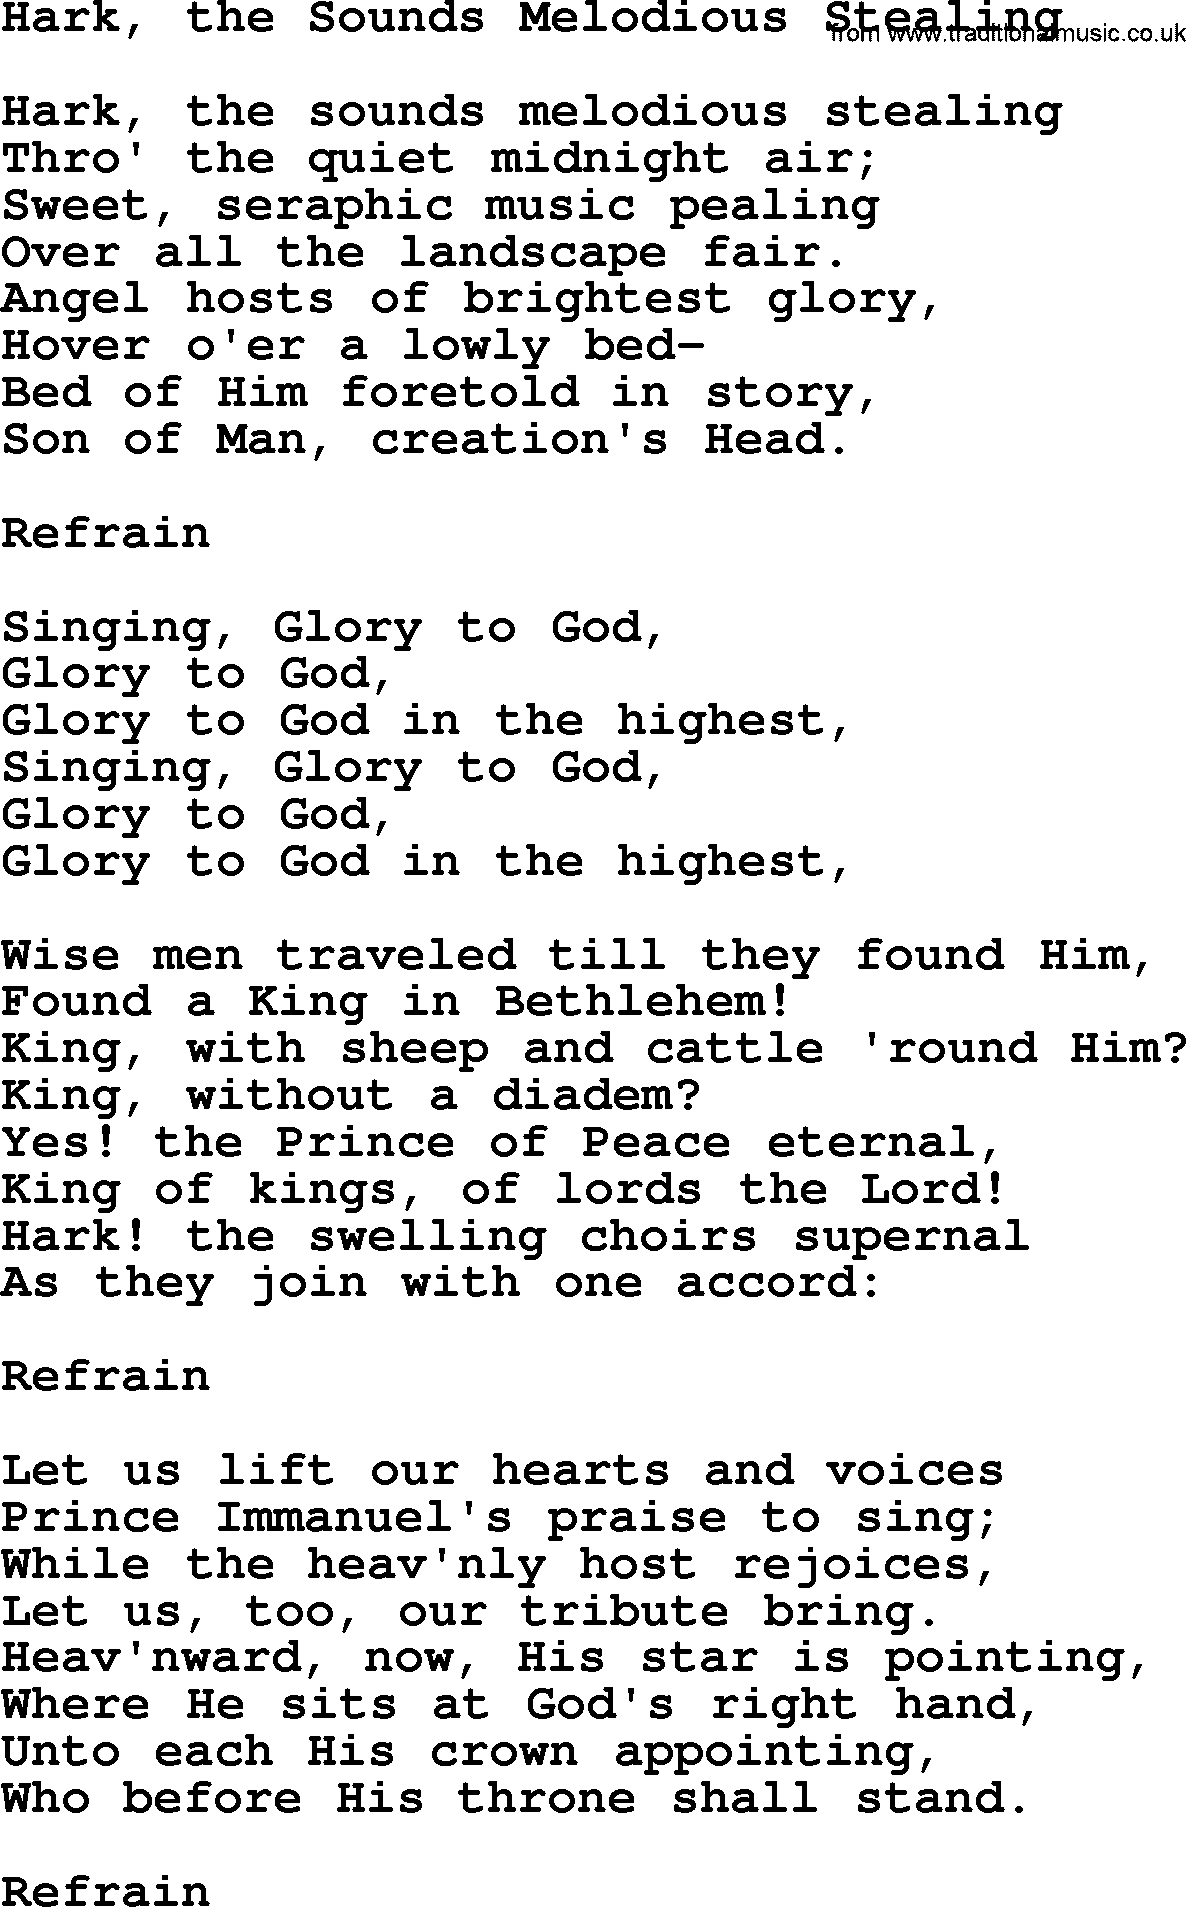 Hymns about Angels, Hymn: Hark, The Sounds Melodious Stealing.txt lyrics with PDF